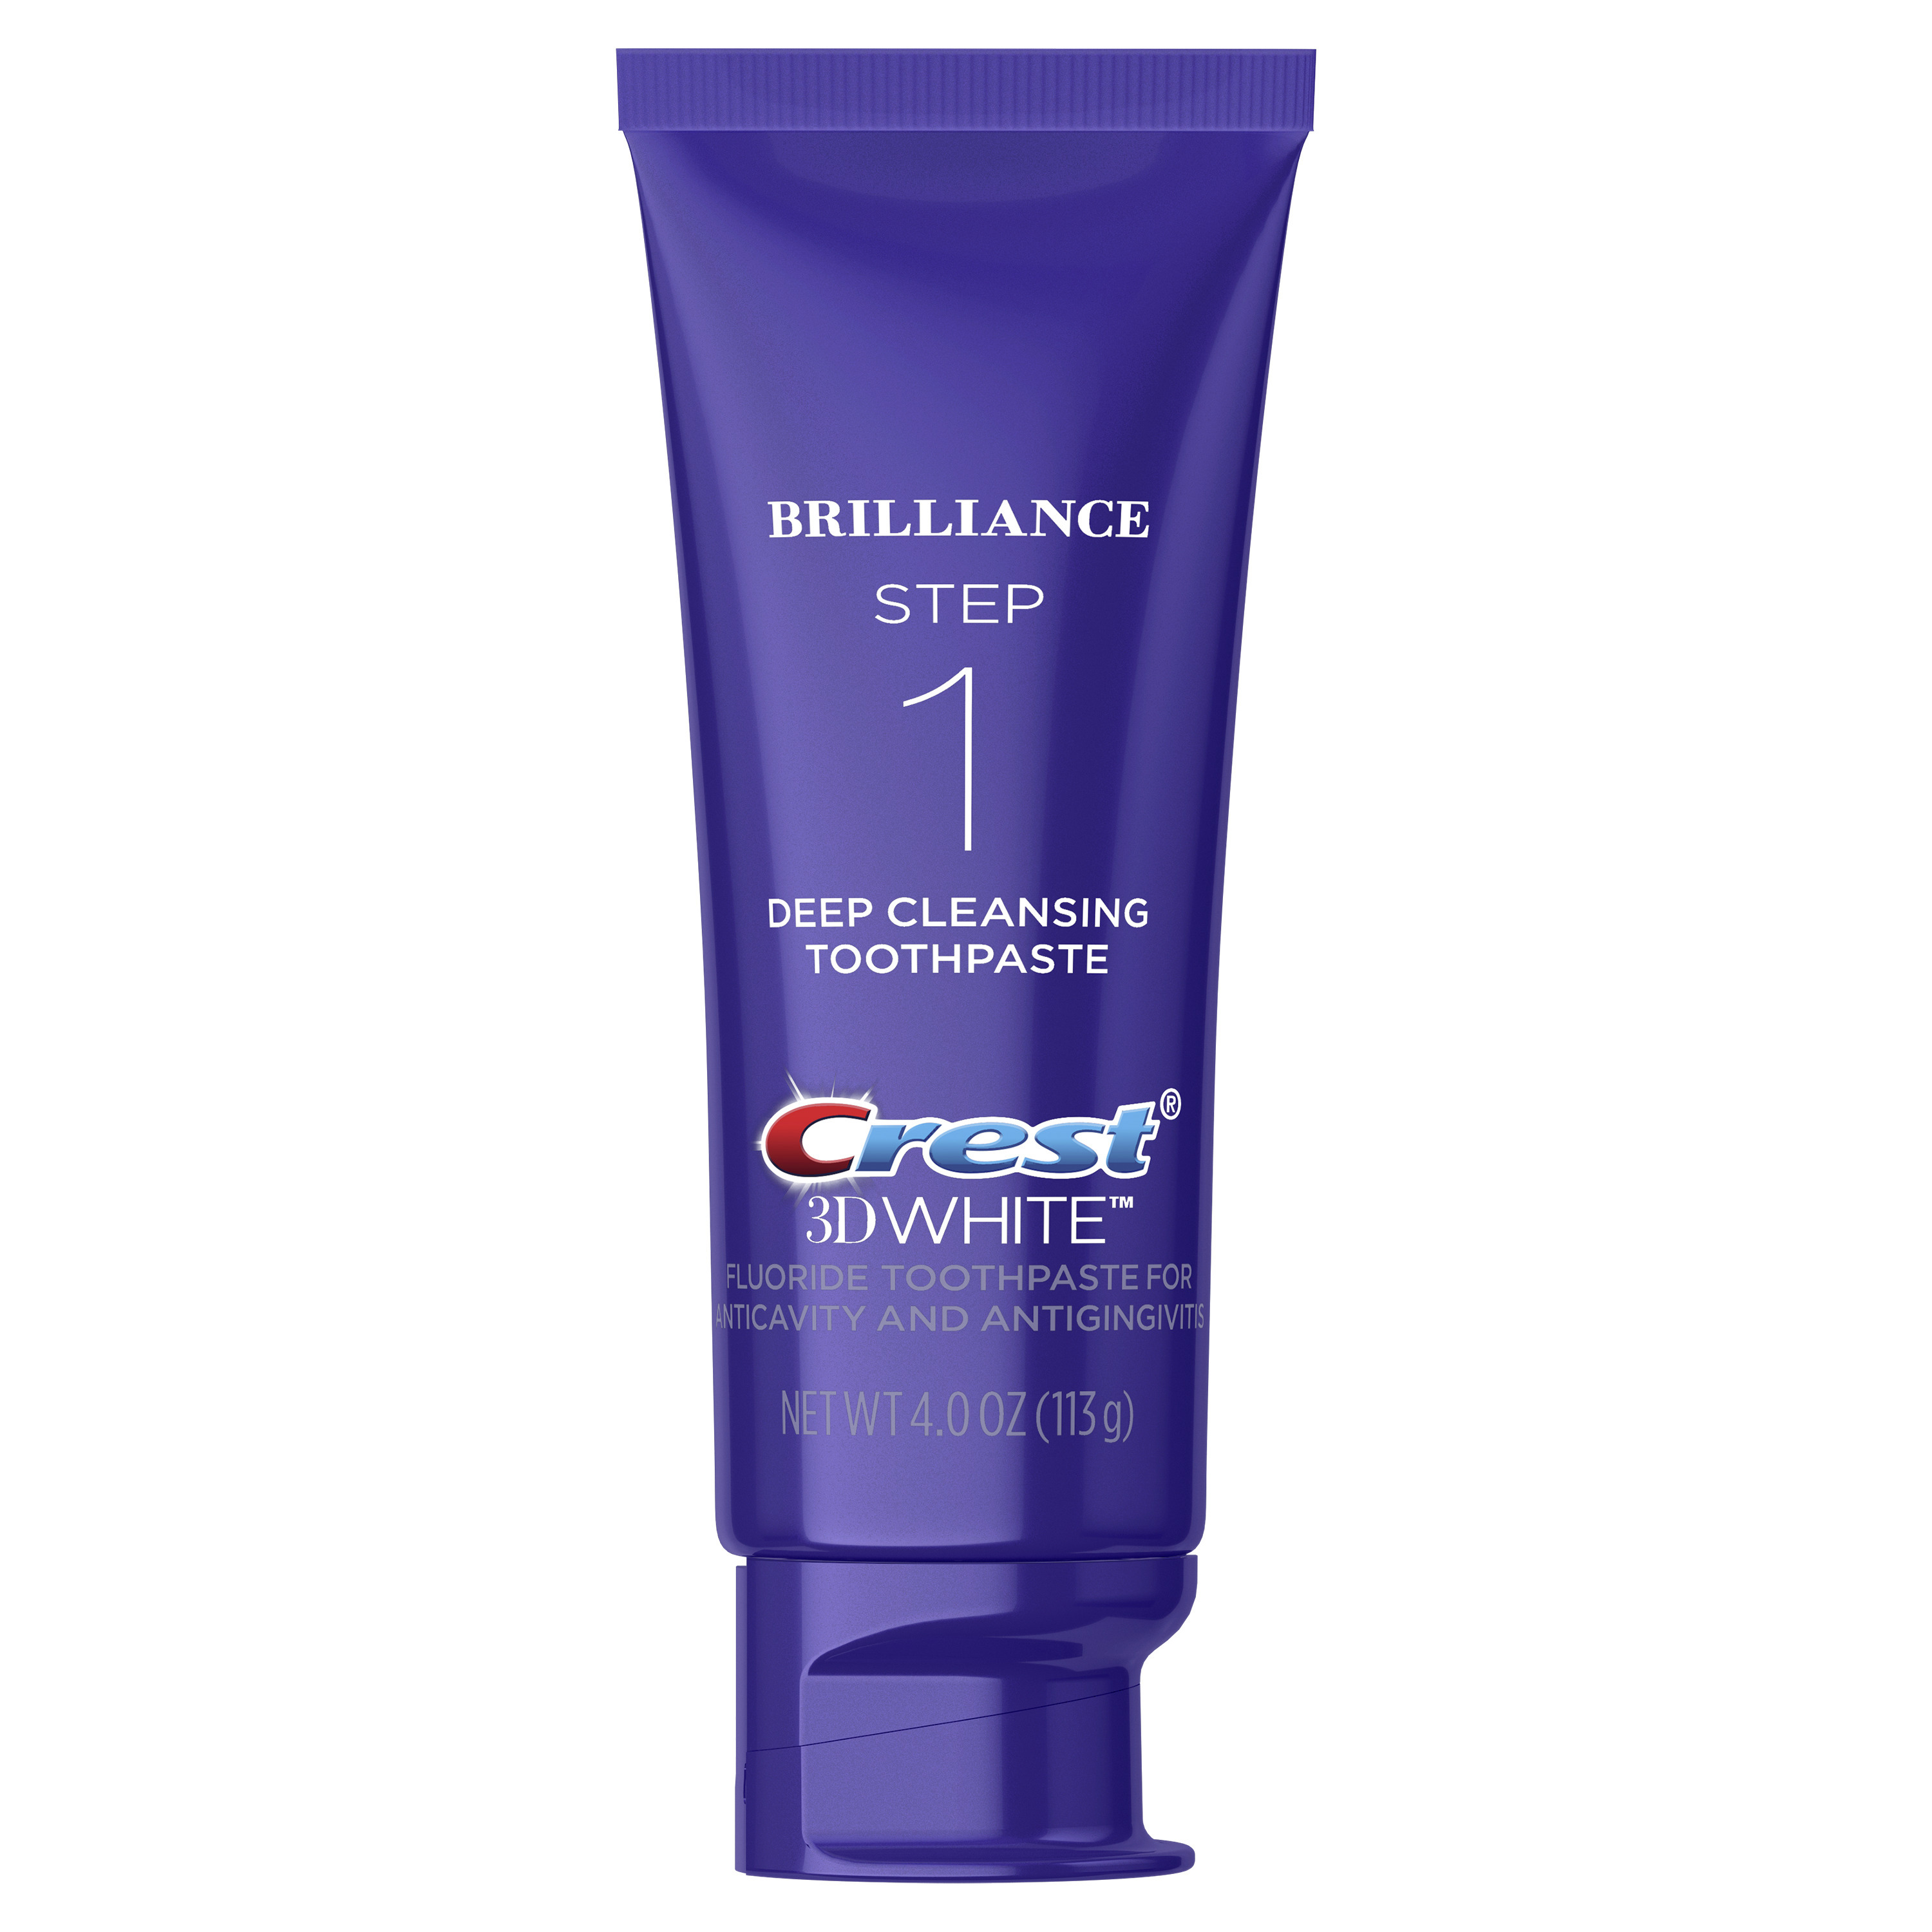 Crest 3D White Brilliance + Whitening Two-Step Toothpaste, Mint, 4.0 oz and 2.3 oz - image 4 of 6